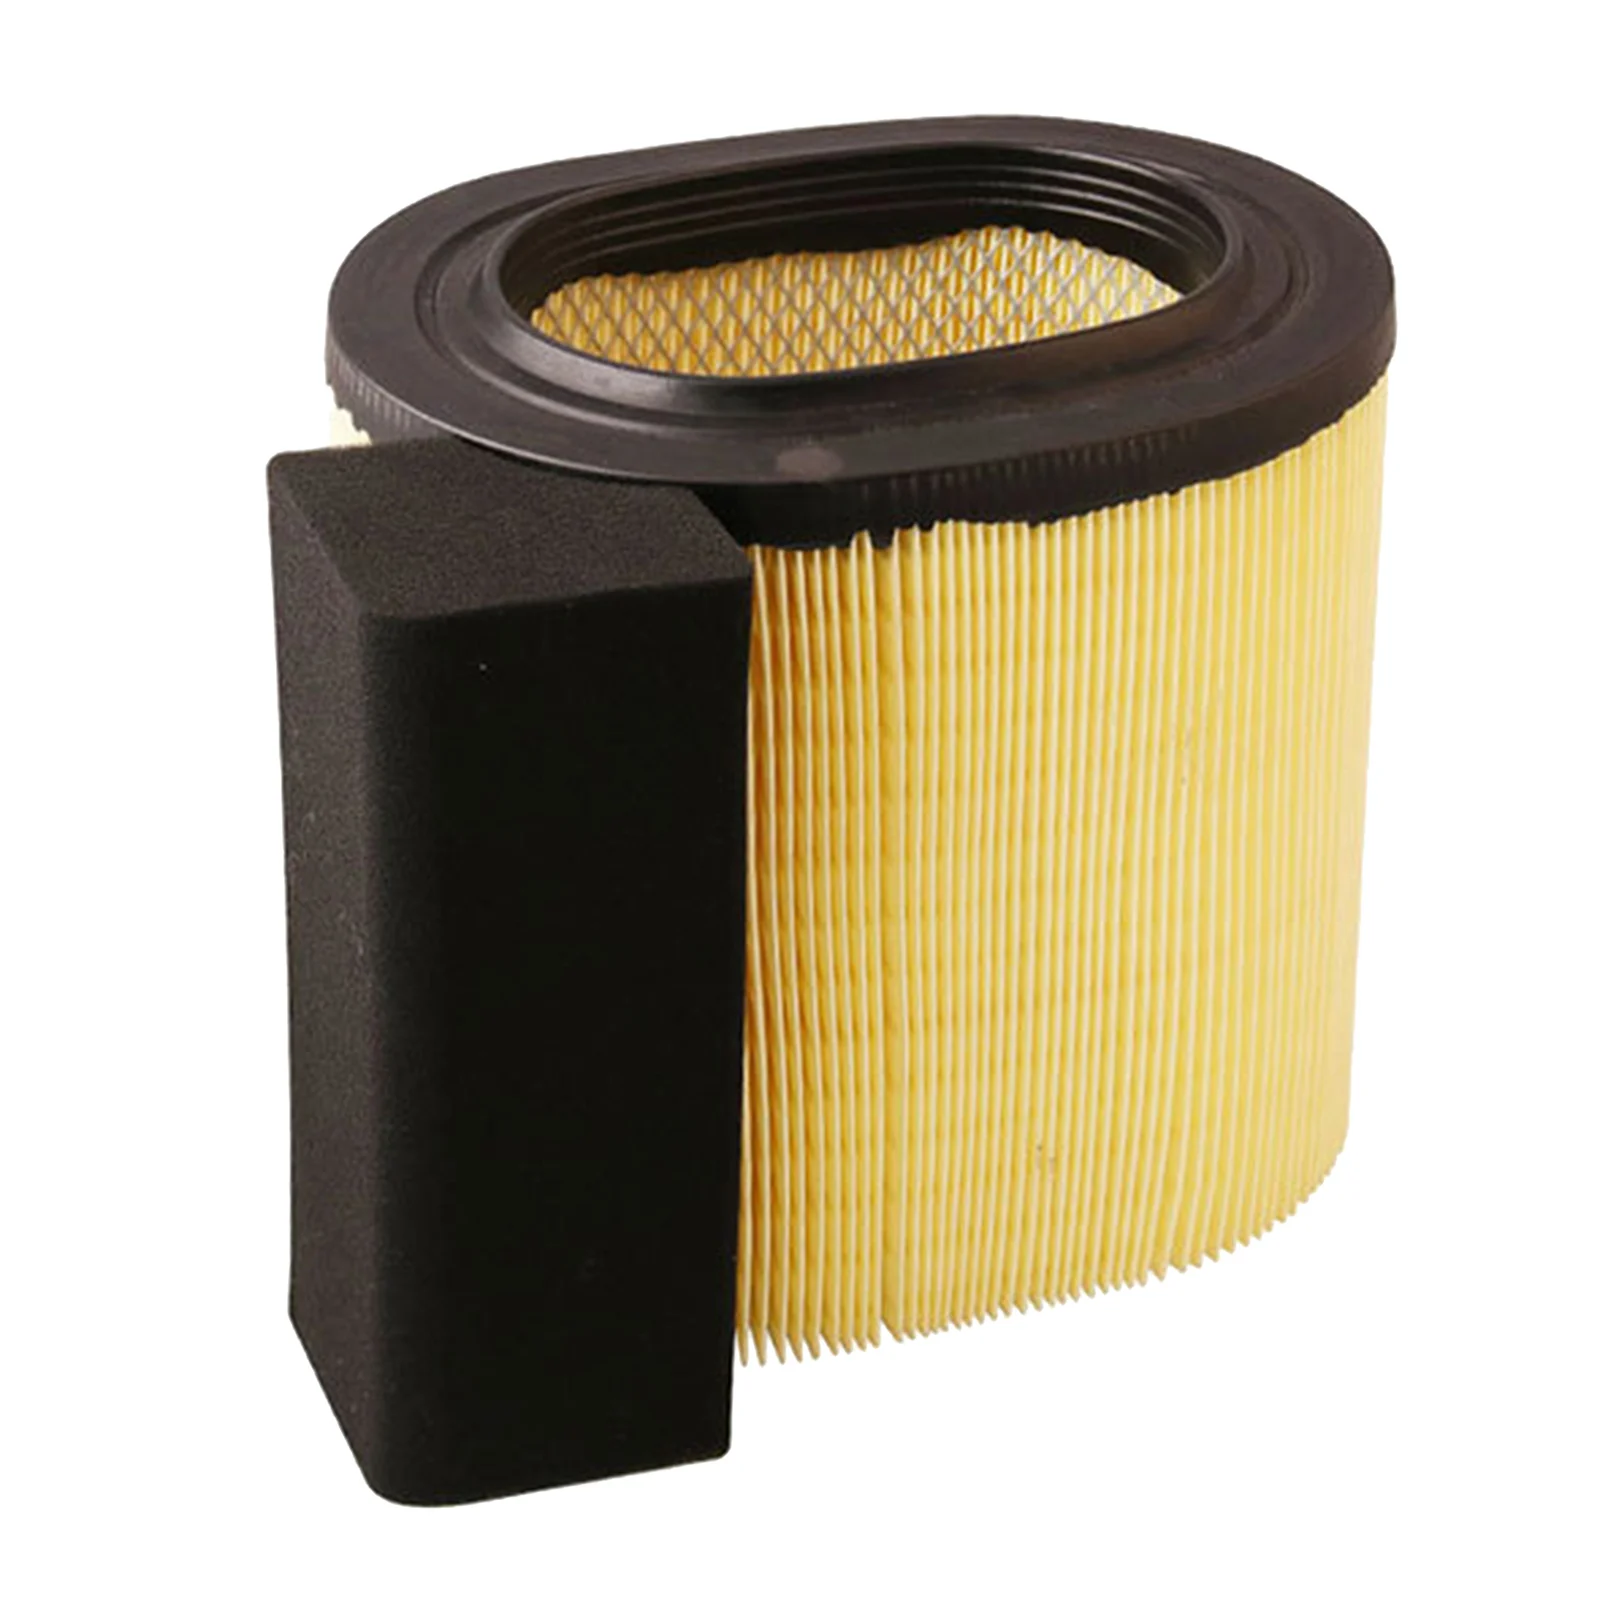 Air Filter for Ford F250 2008 2009 2010 Super Duty 6.4L Powerstrokes  Engine Air Filter Replaces HC3Z9601A Air Filter Element